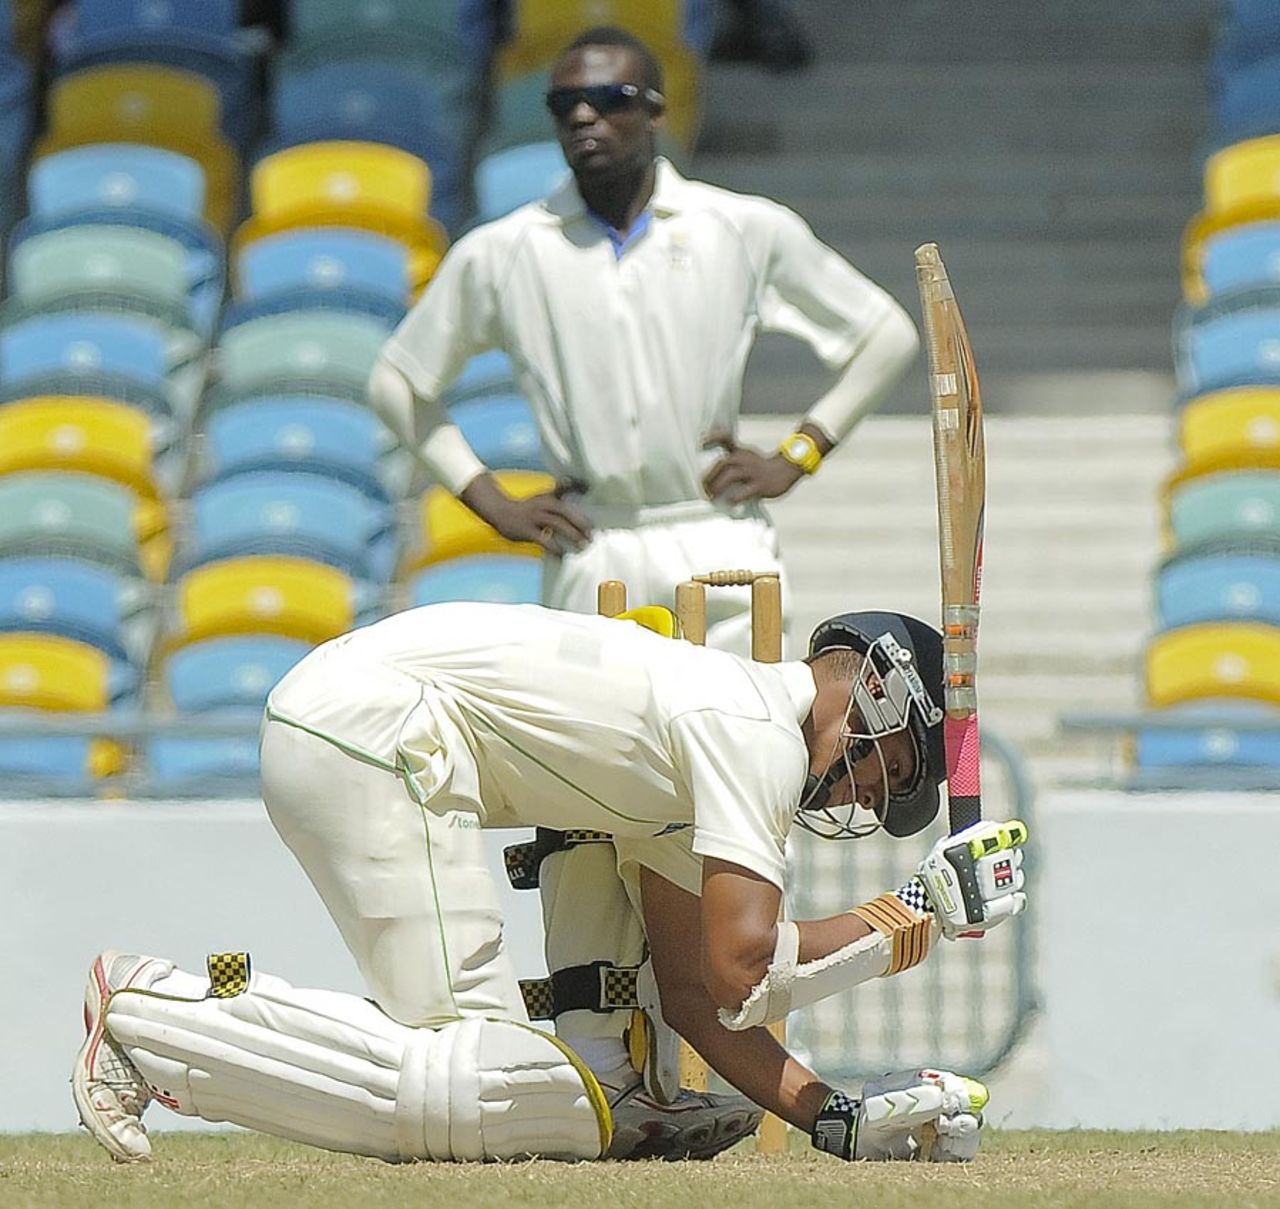 Tagenarine Chanderpaul uses the bail to take guard, Barbados v Guyana, Regional Four Day Competition, 2nd day, Barbados, February 16, 2013